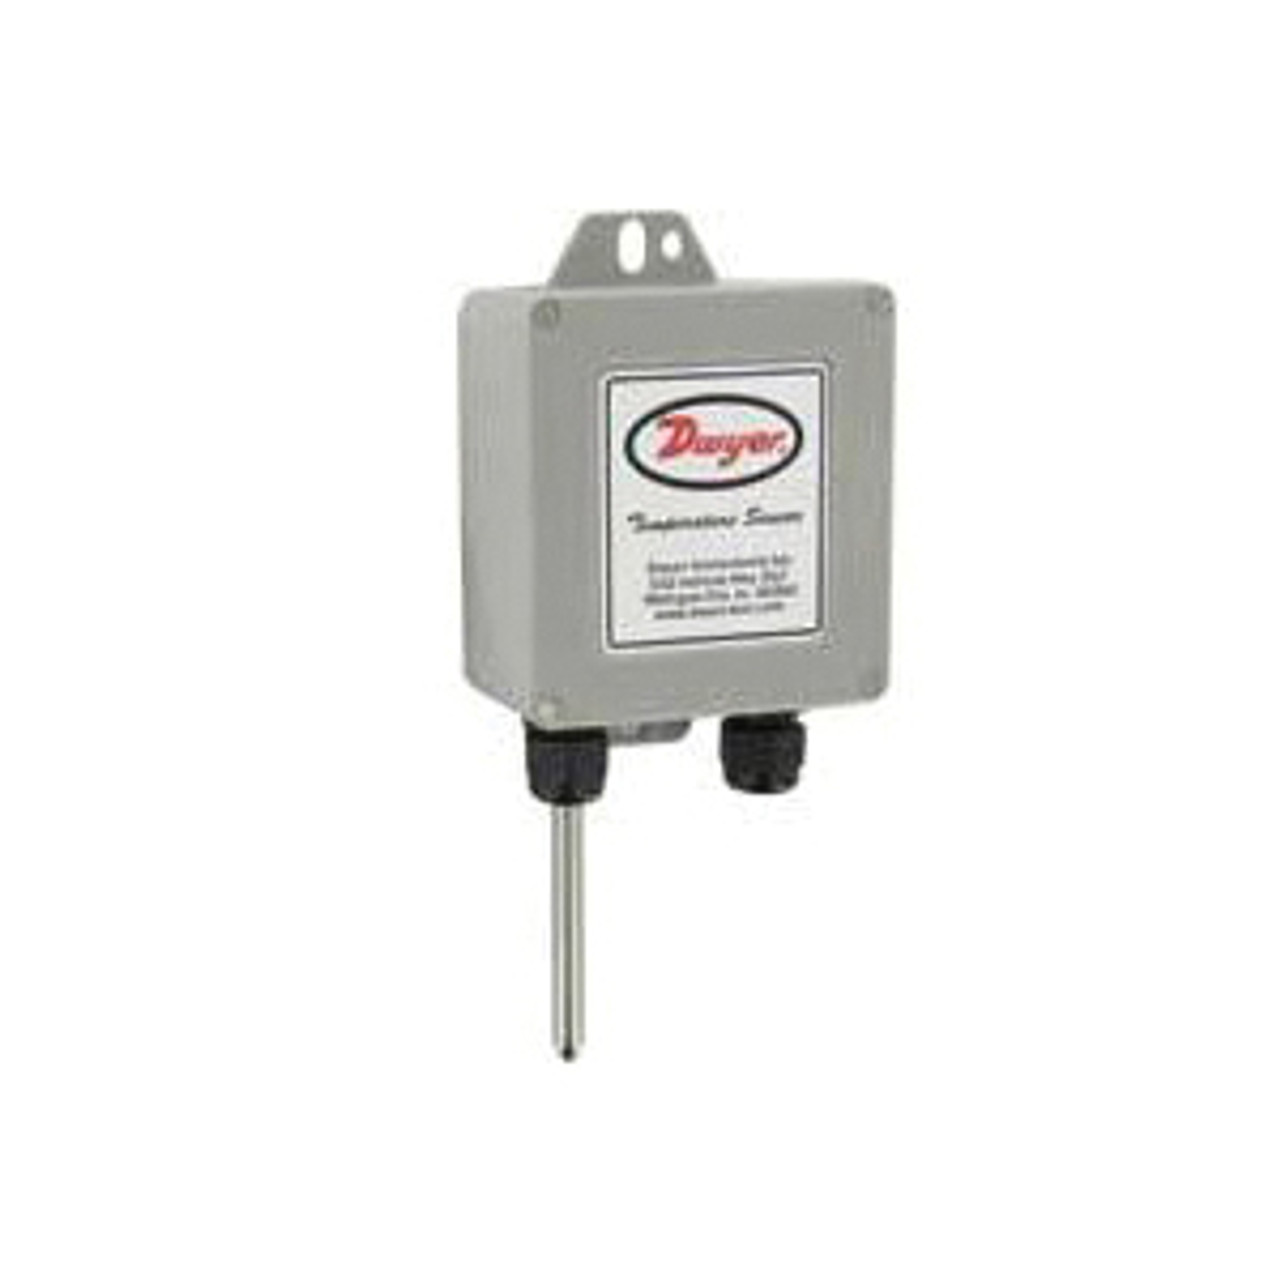 Choosing the Right Industrial Temperature Sensor for Your Equipment